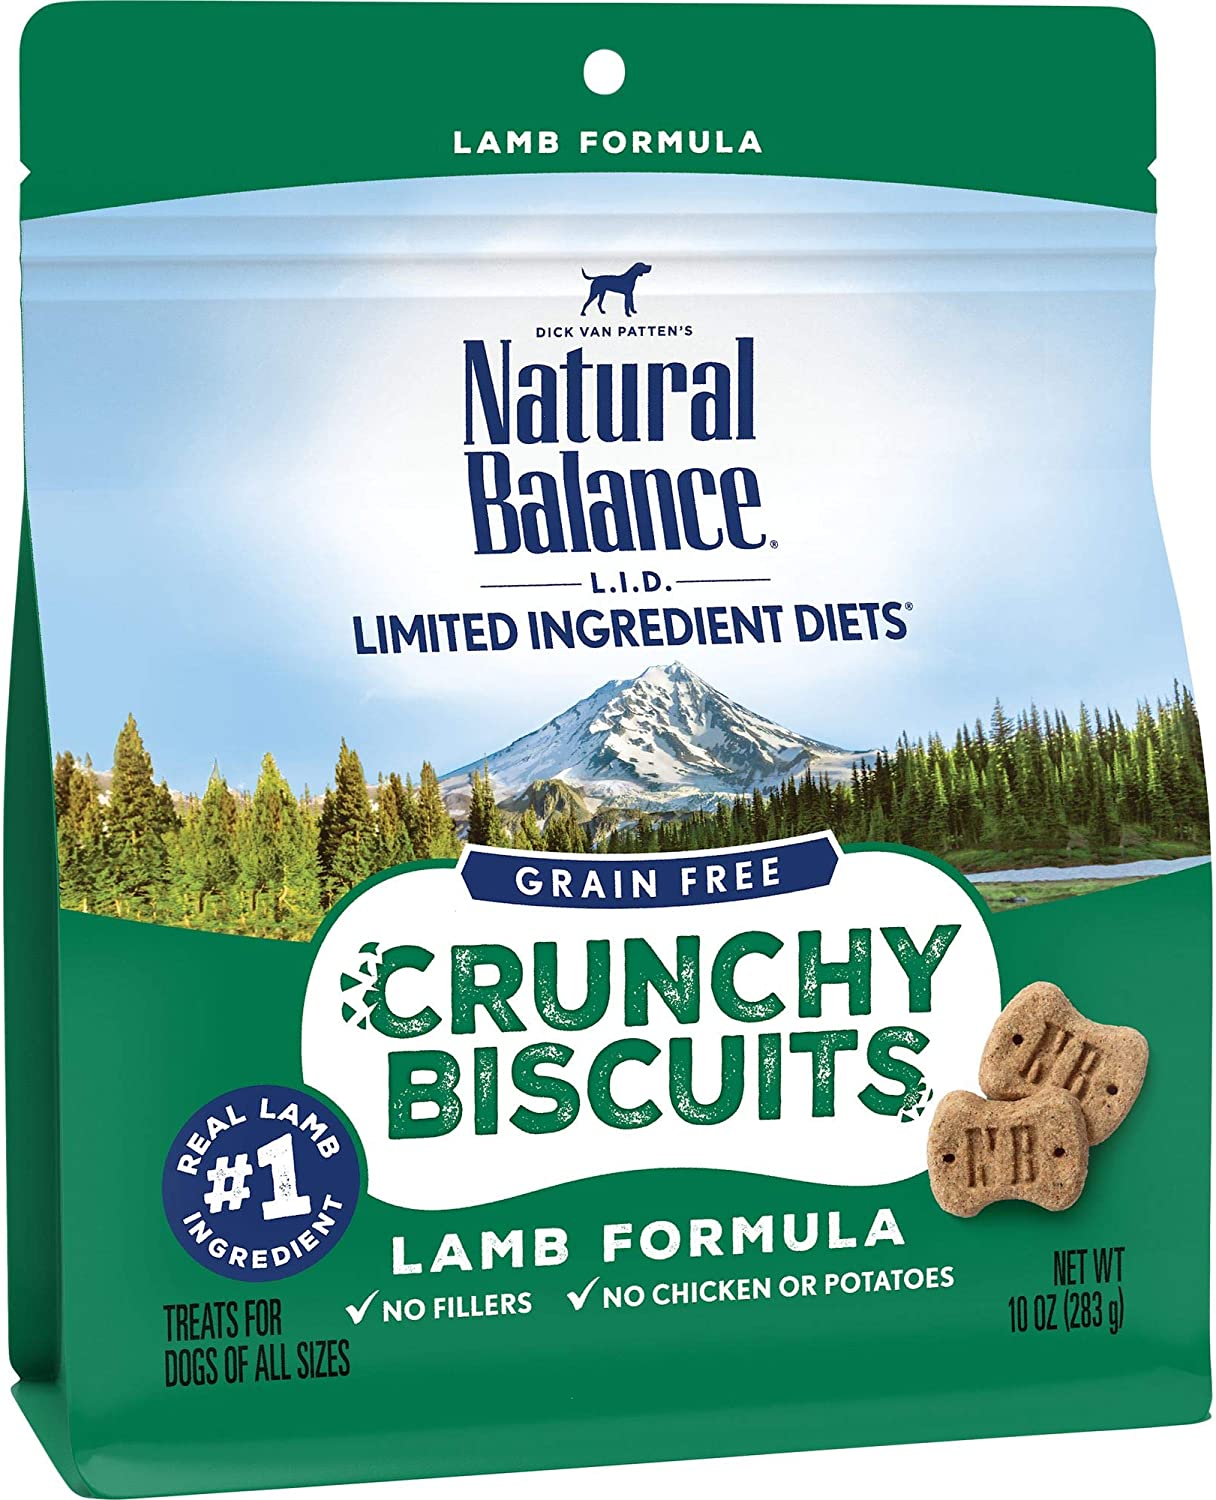 10-Oz Natural Balance Limited Ingredient Diet Dog Treats ( Lamb Flavor) $3.35 + Free Shipping w/ Amazon Prime or Orders $25+